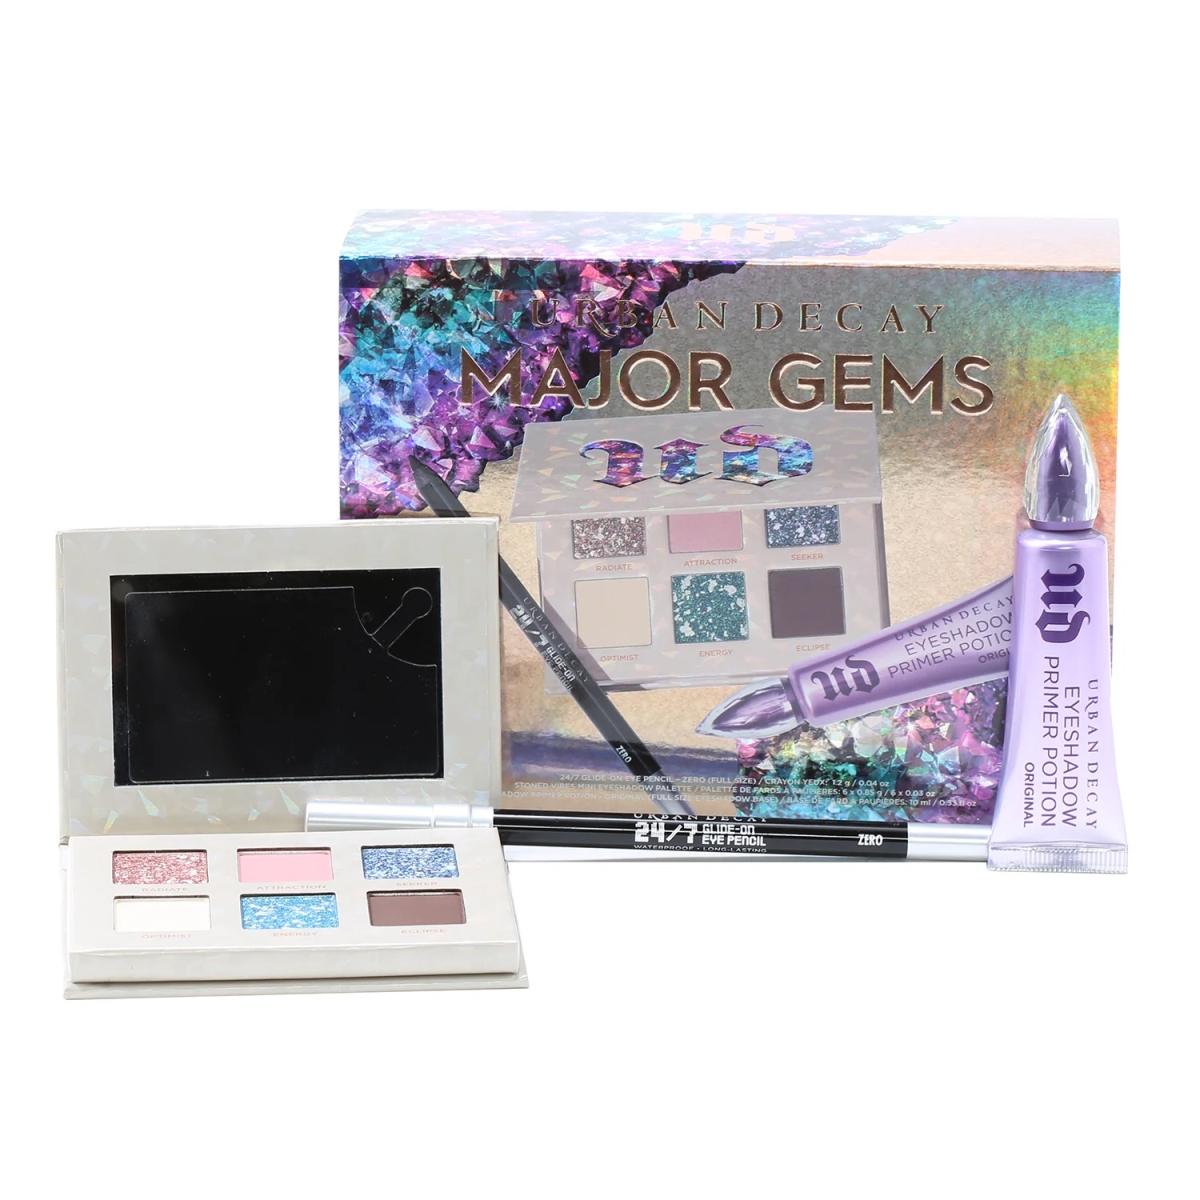 Picture of Urban Decay 55095552 Stoned Vibes Major Gems Gift Set - 3 Piece